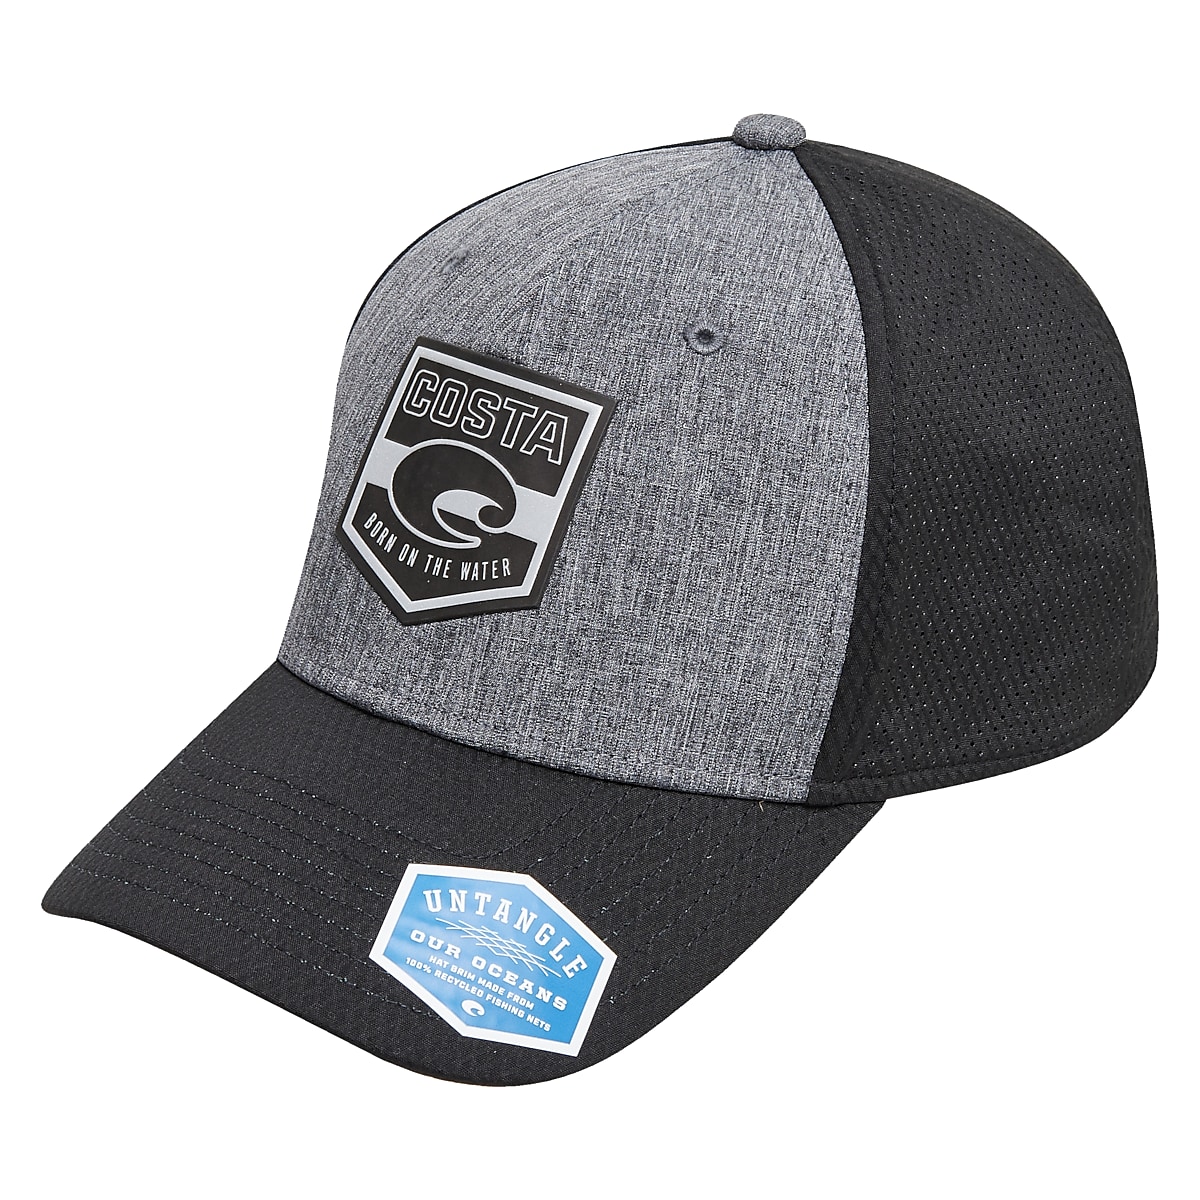 Born On The Water Xl Performance Hat